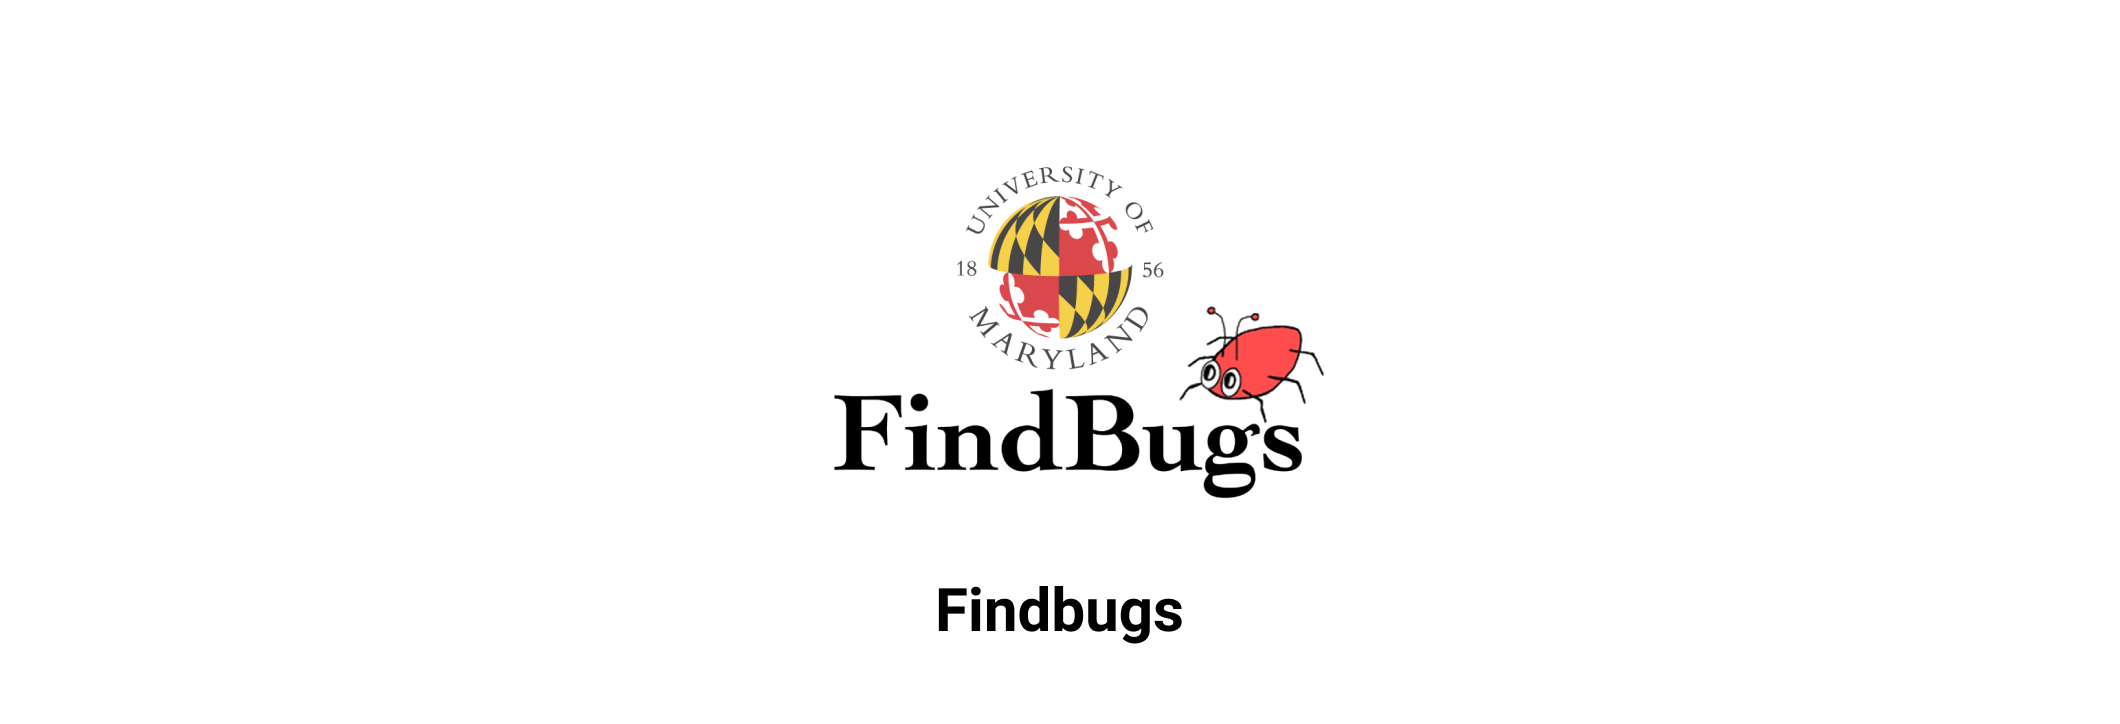 Best Android Development Tools Findbugs